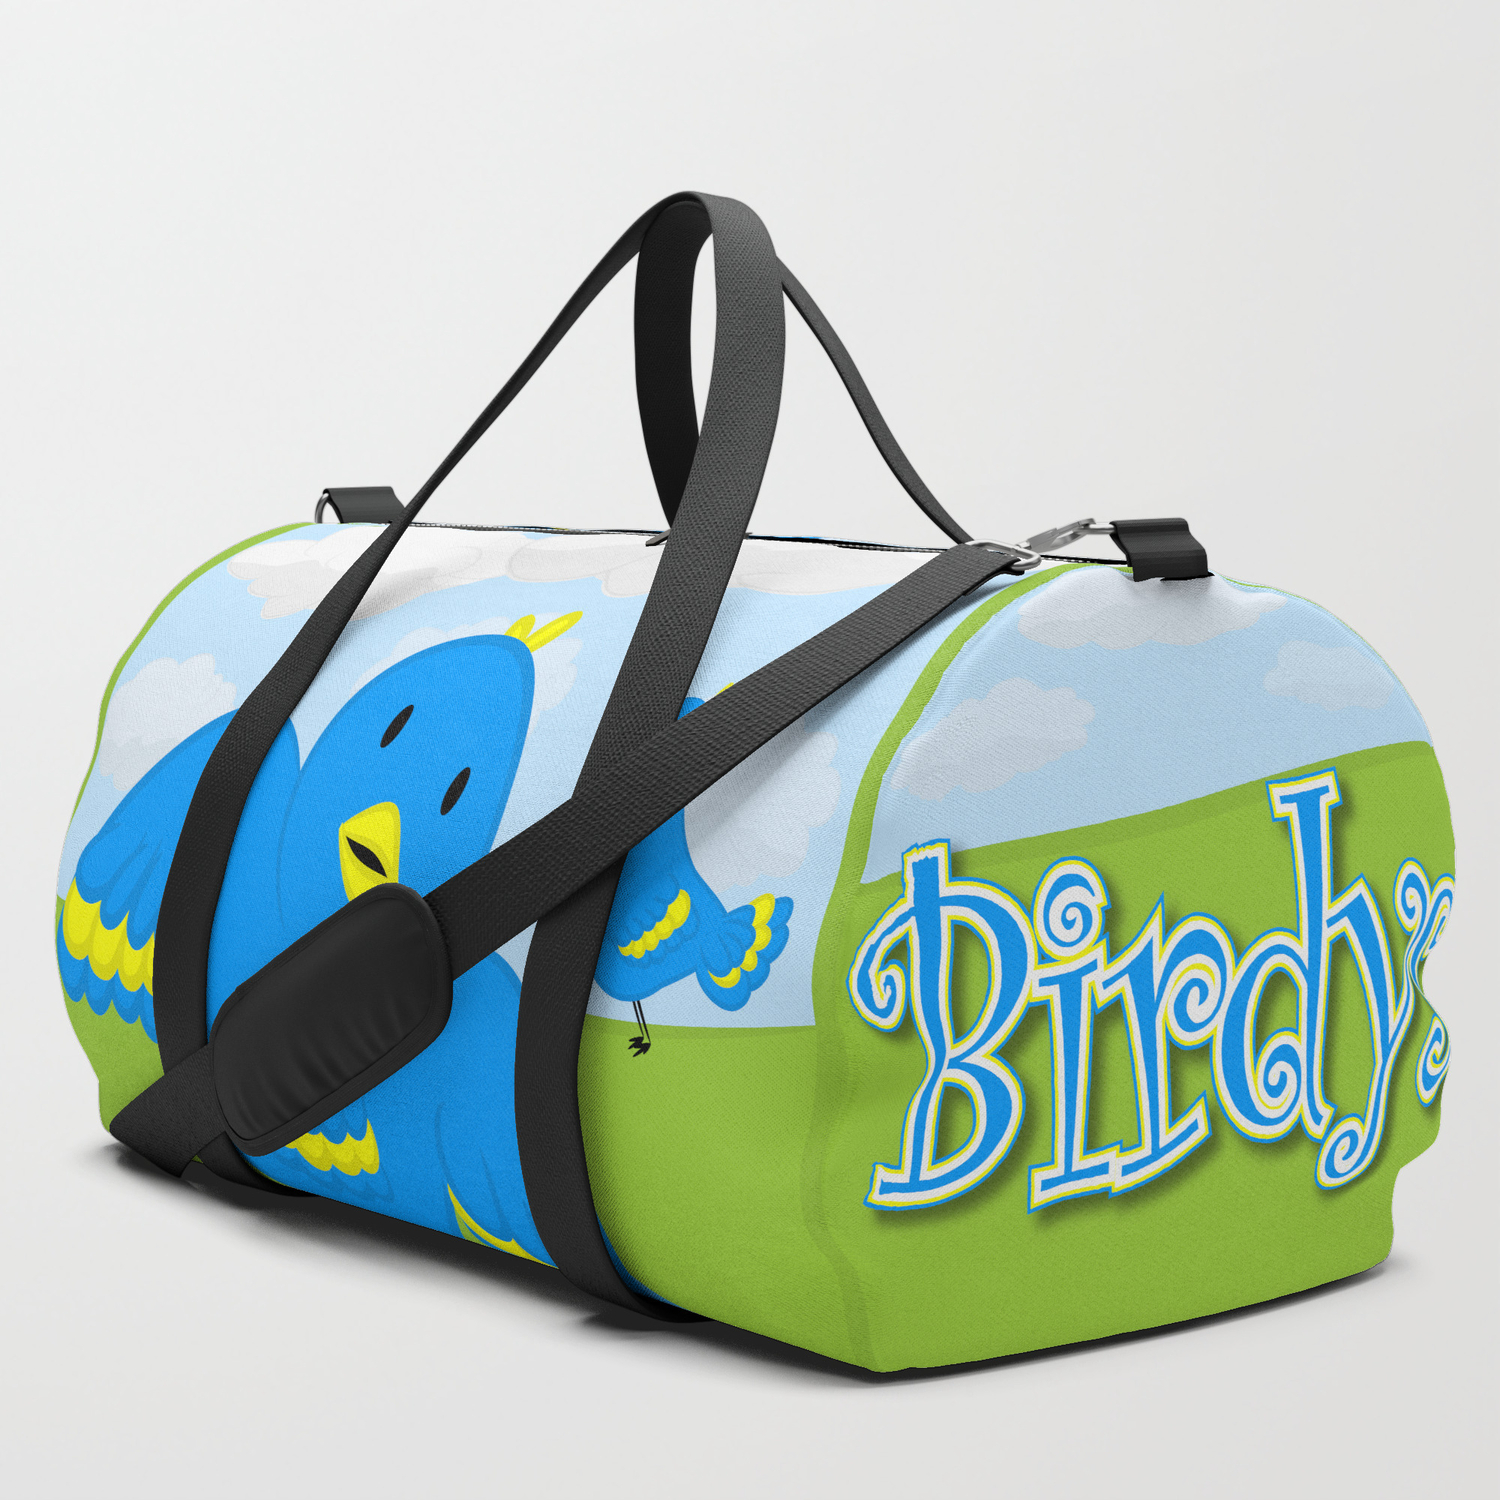 Download View Duffel Bag Mockup Images Yellowimages - Free PSD ...